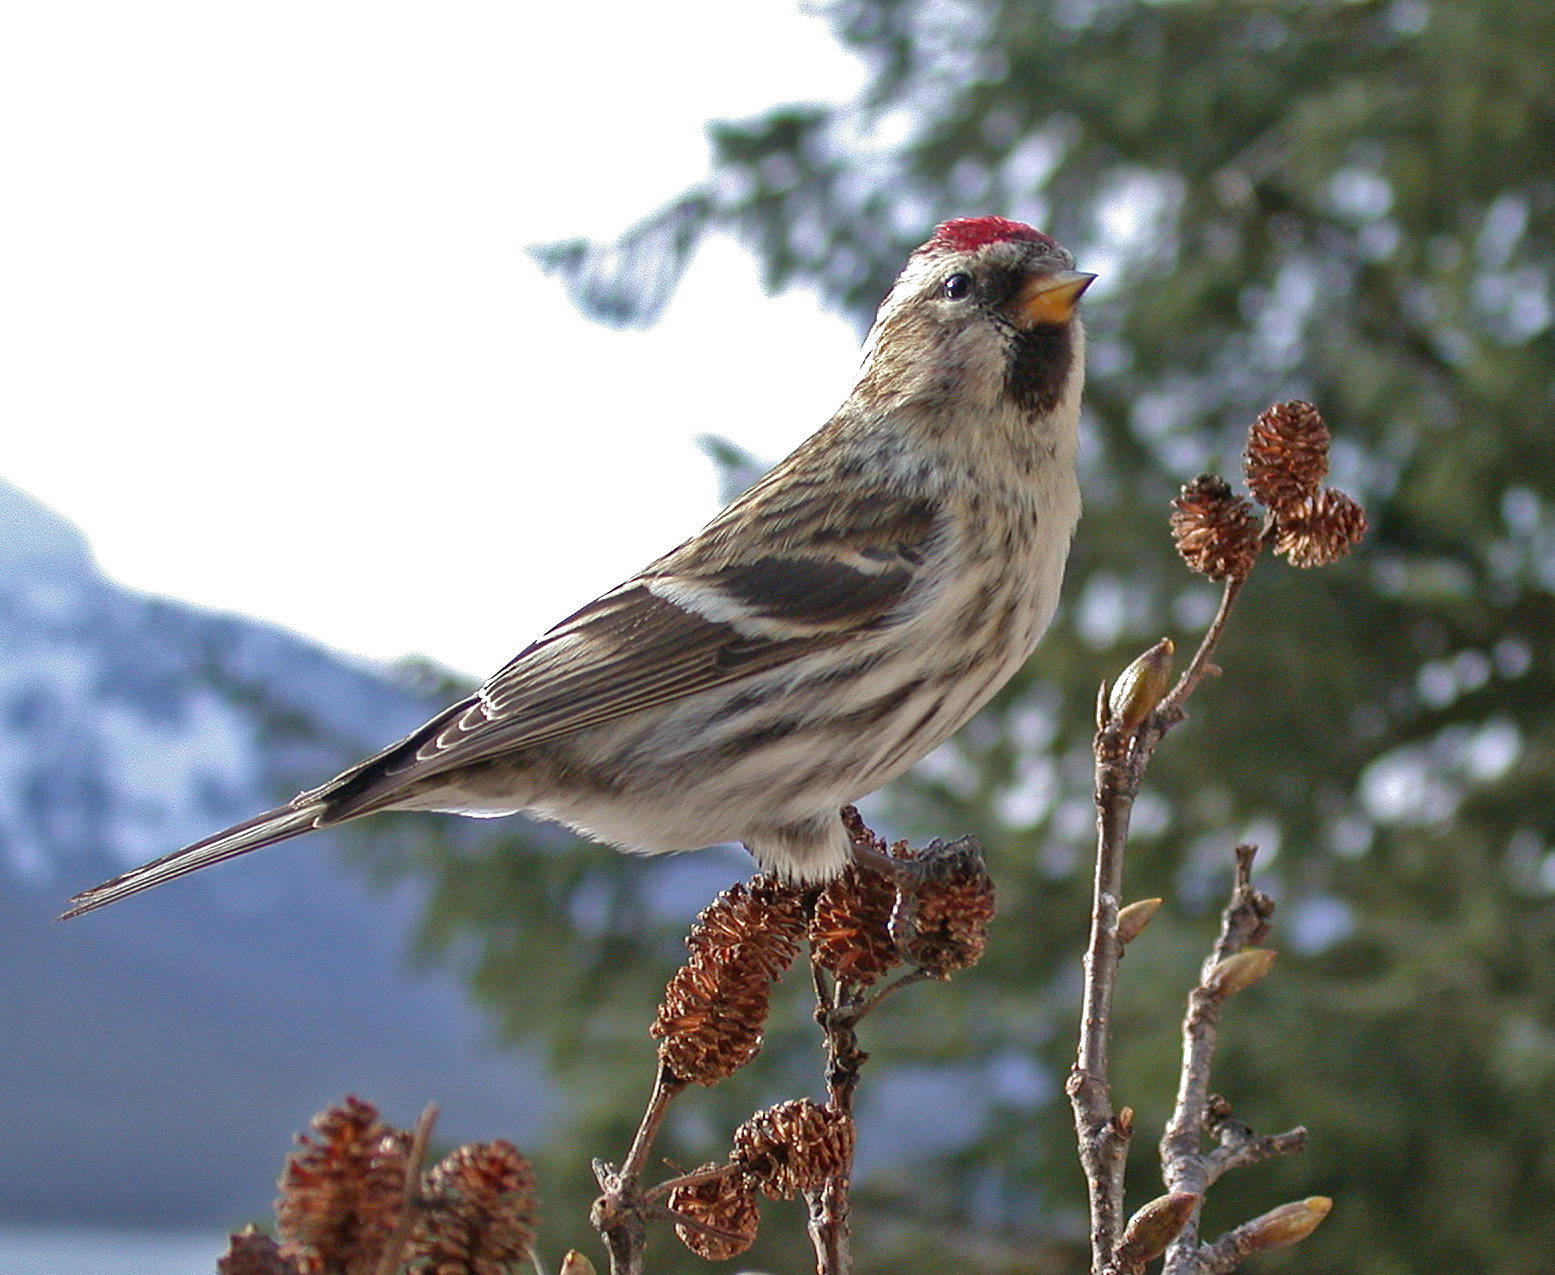 Redpolls forage on alder cones in late winter here and also visit bird feeders regularly. (Photo by Bob Armstrong)